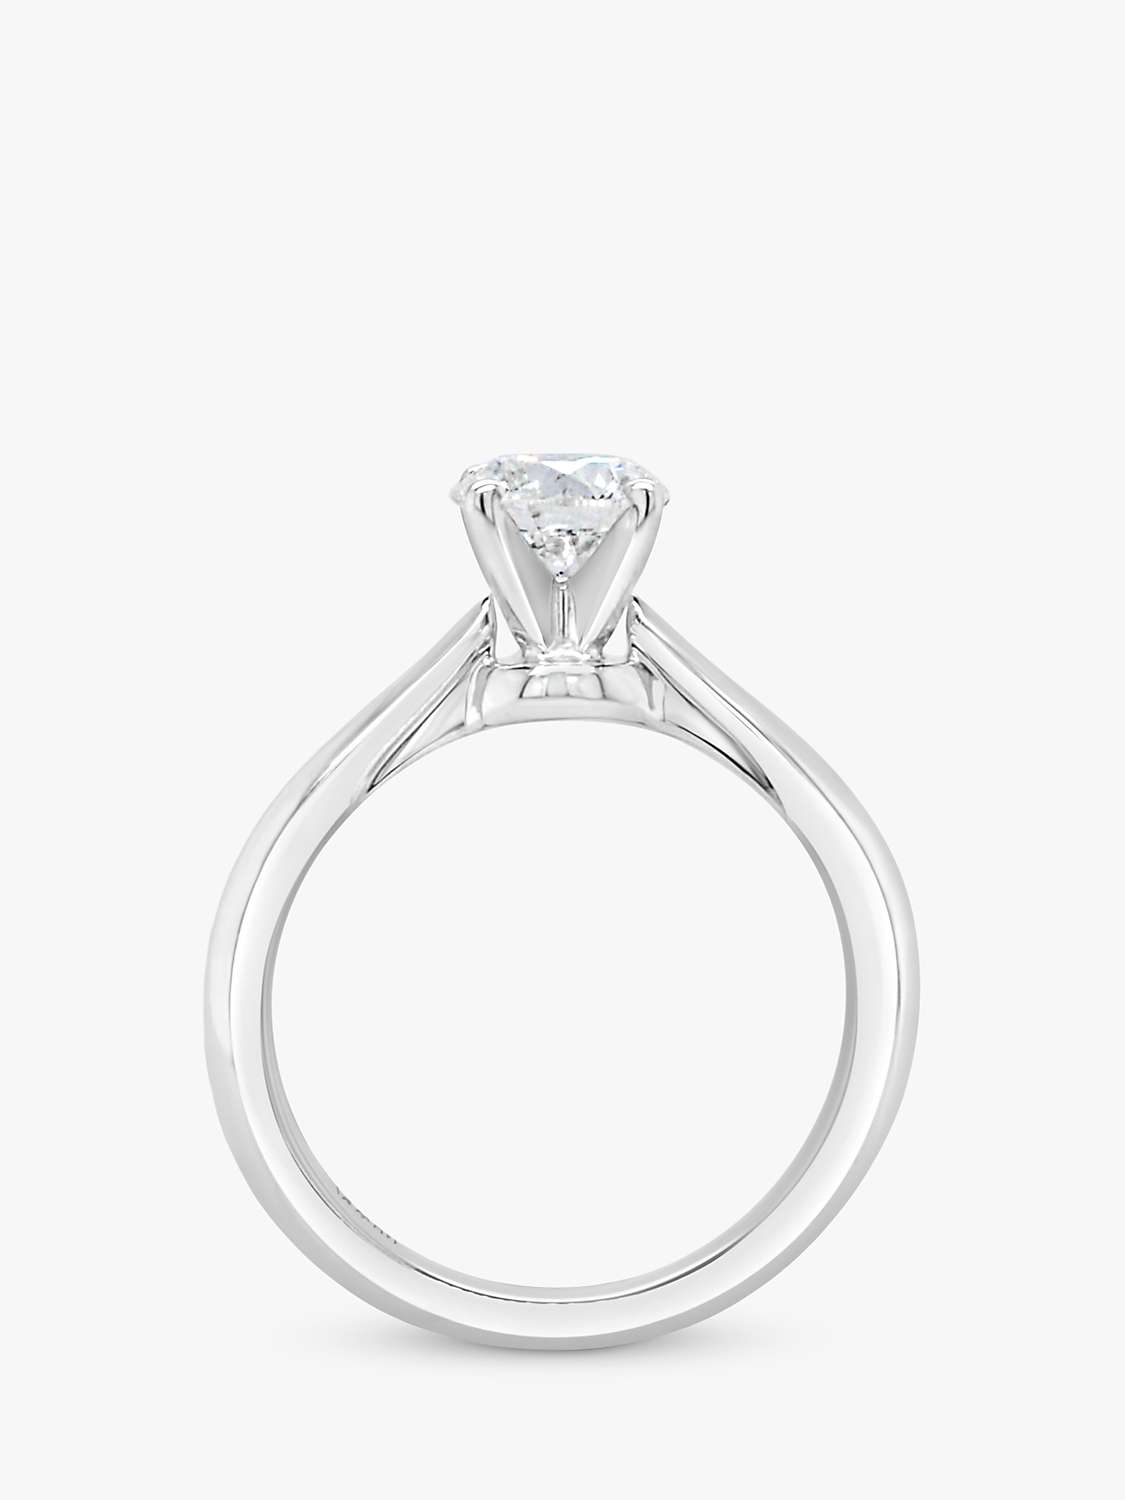 Buy Milton & Humble Jewellery Second Hand Platinum Diamond Solitaire Engagement Ring Online at johnlewis.com